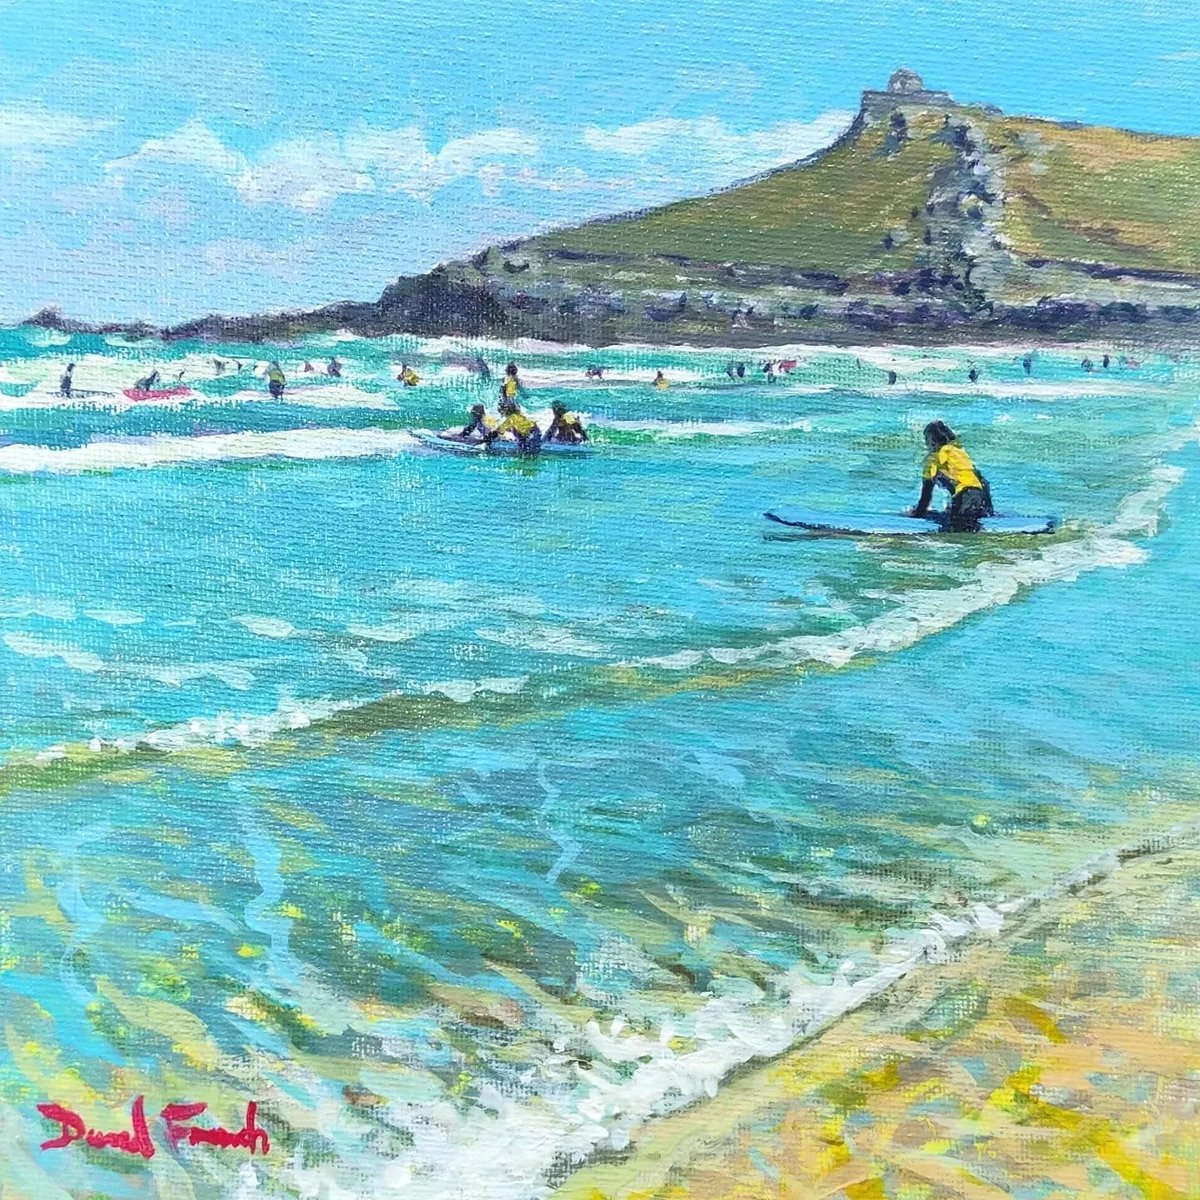 'Island Surf'' 

20 x 20cm acrylic on canvas board (29x29 approx framed size)

Arthouse Gallery Island Road St Ives
thearthouses.com

Available now

#arthousestives #arthouses #stives #cornwall #beachpeople #summerholiday
#triptothebeach
#gonesurfing